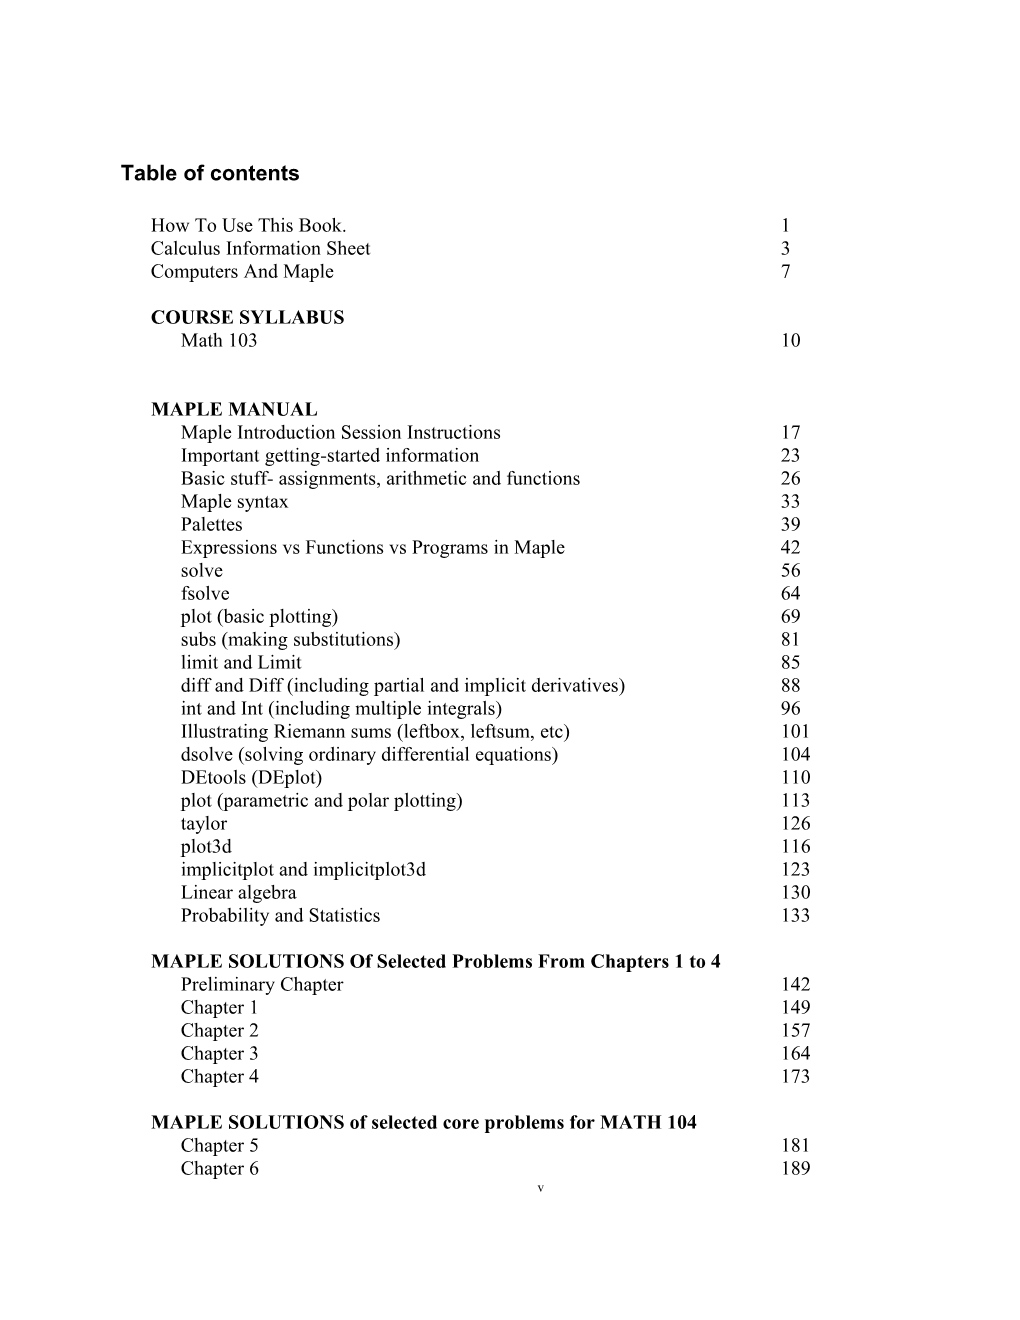 Table of Contents s400